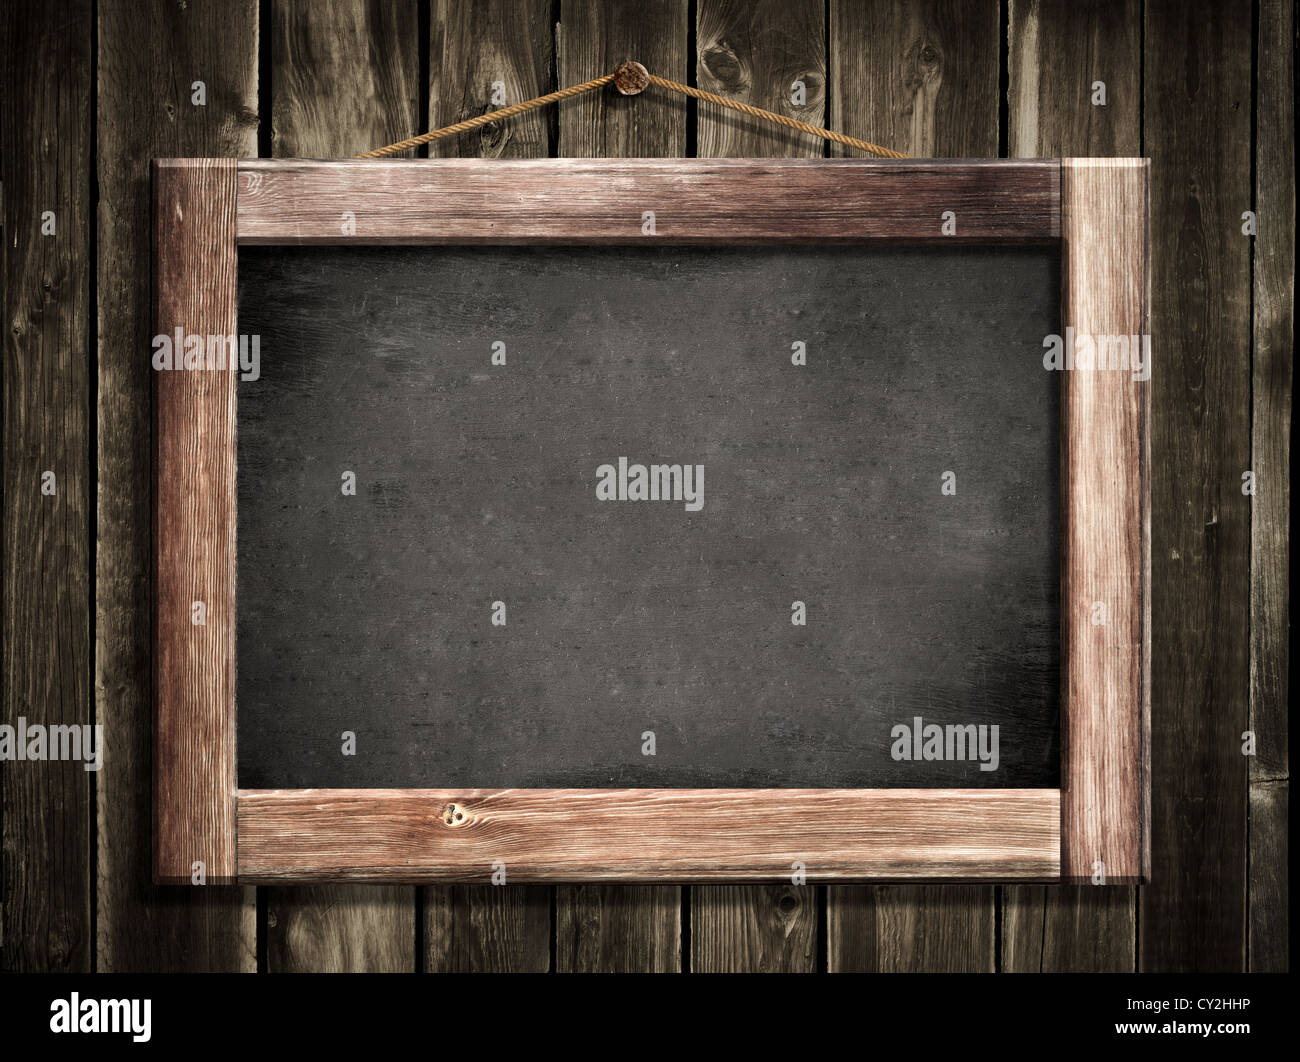 Grunge small blackboard hanging on wooden wall as a background for your message Stock Photo